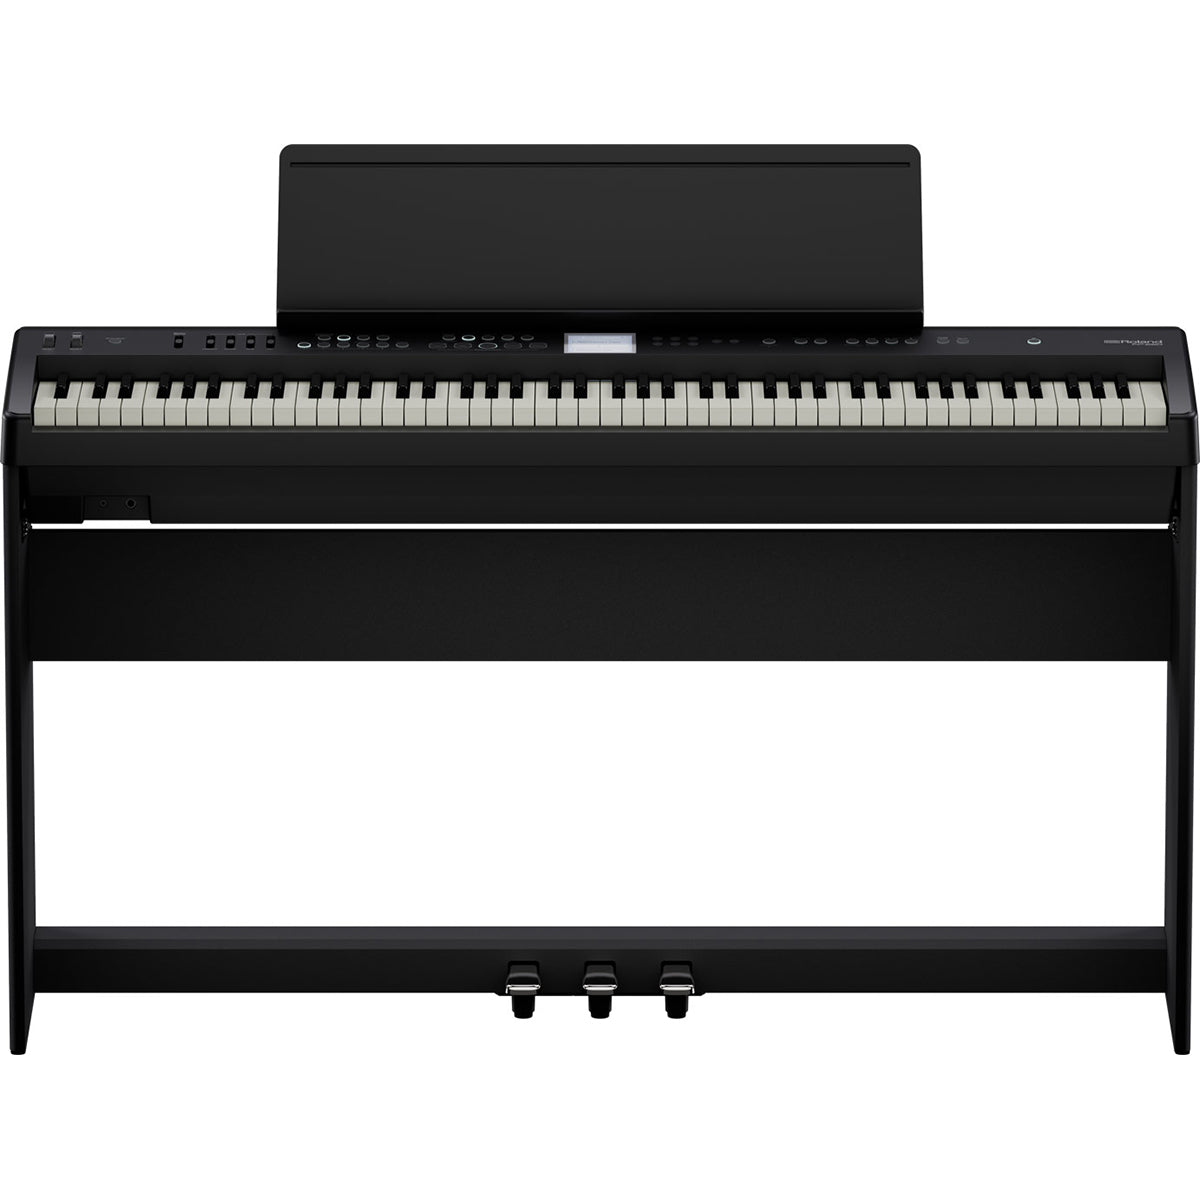 Roland FP-E50 Digital Piano Black w/ Entertainment Features - Kit inc. Stand & 3 Pedals